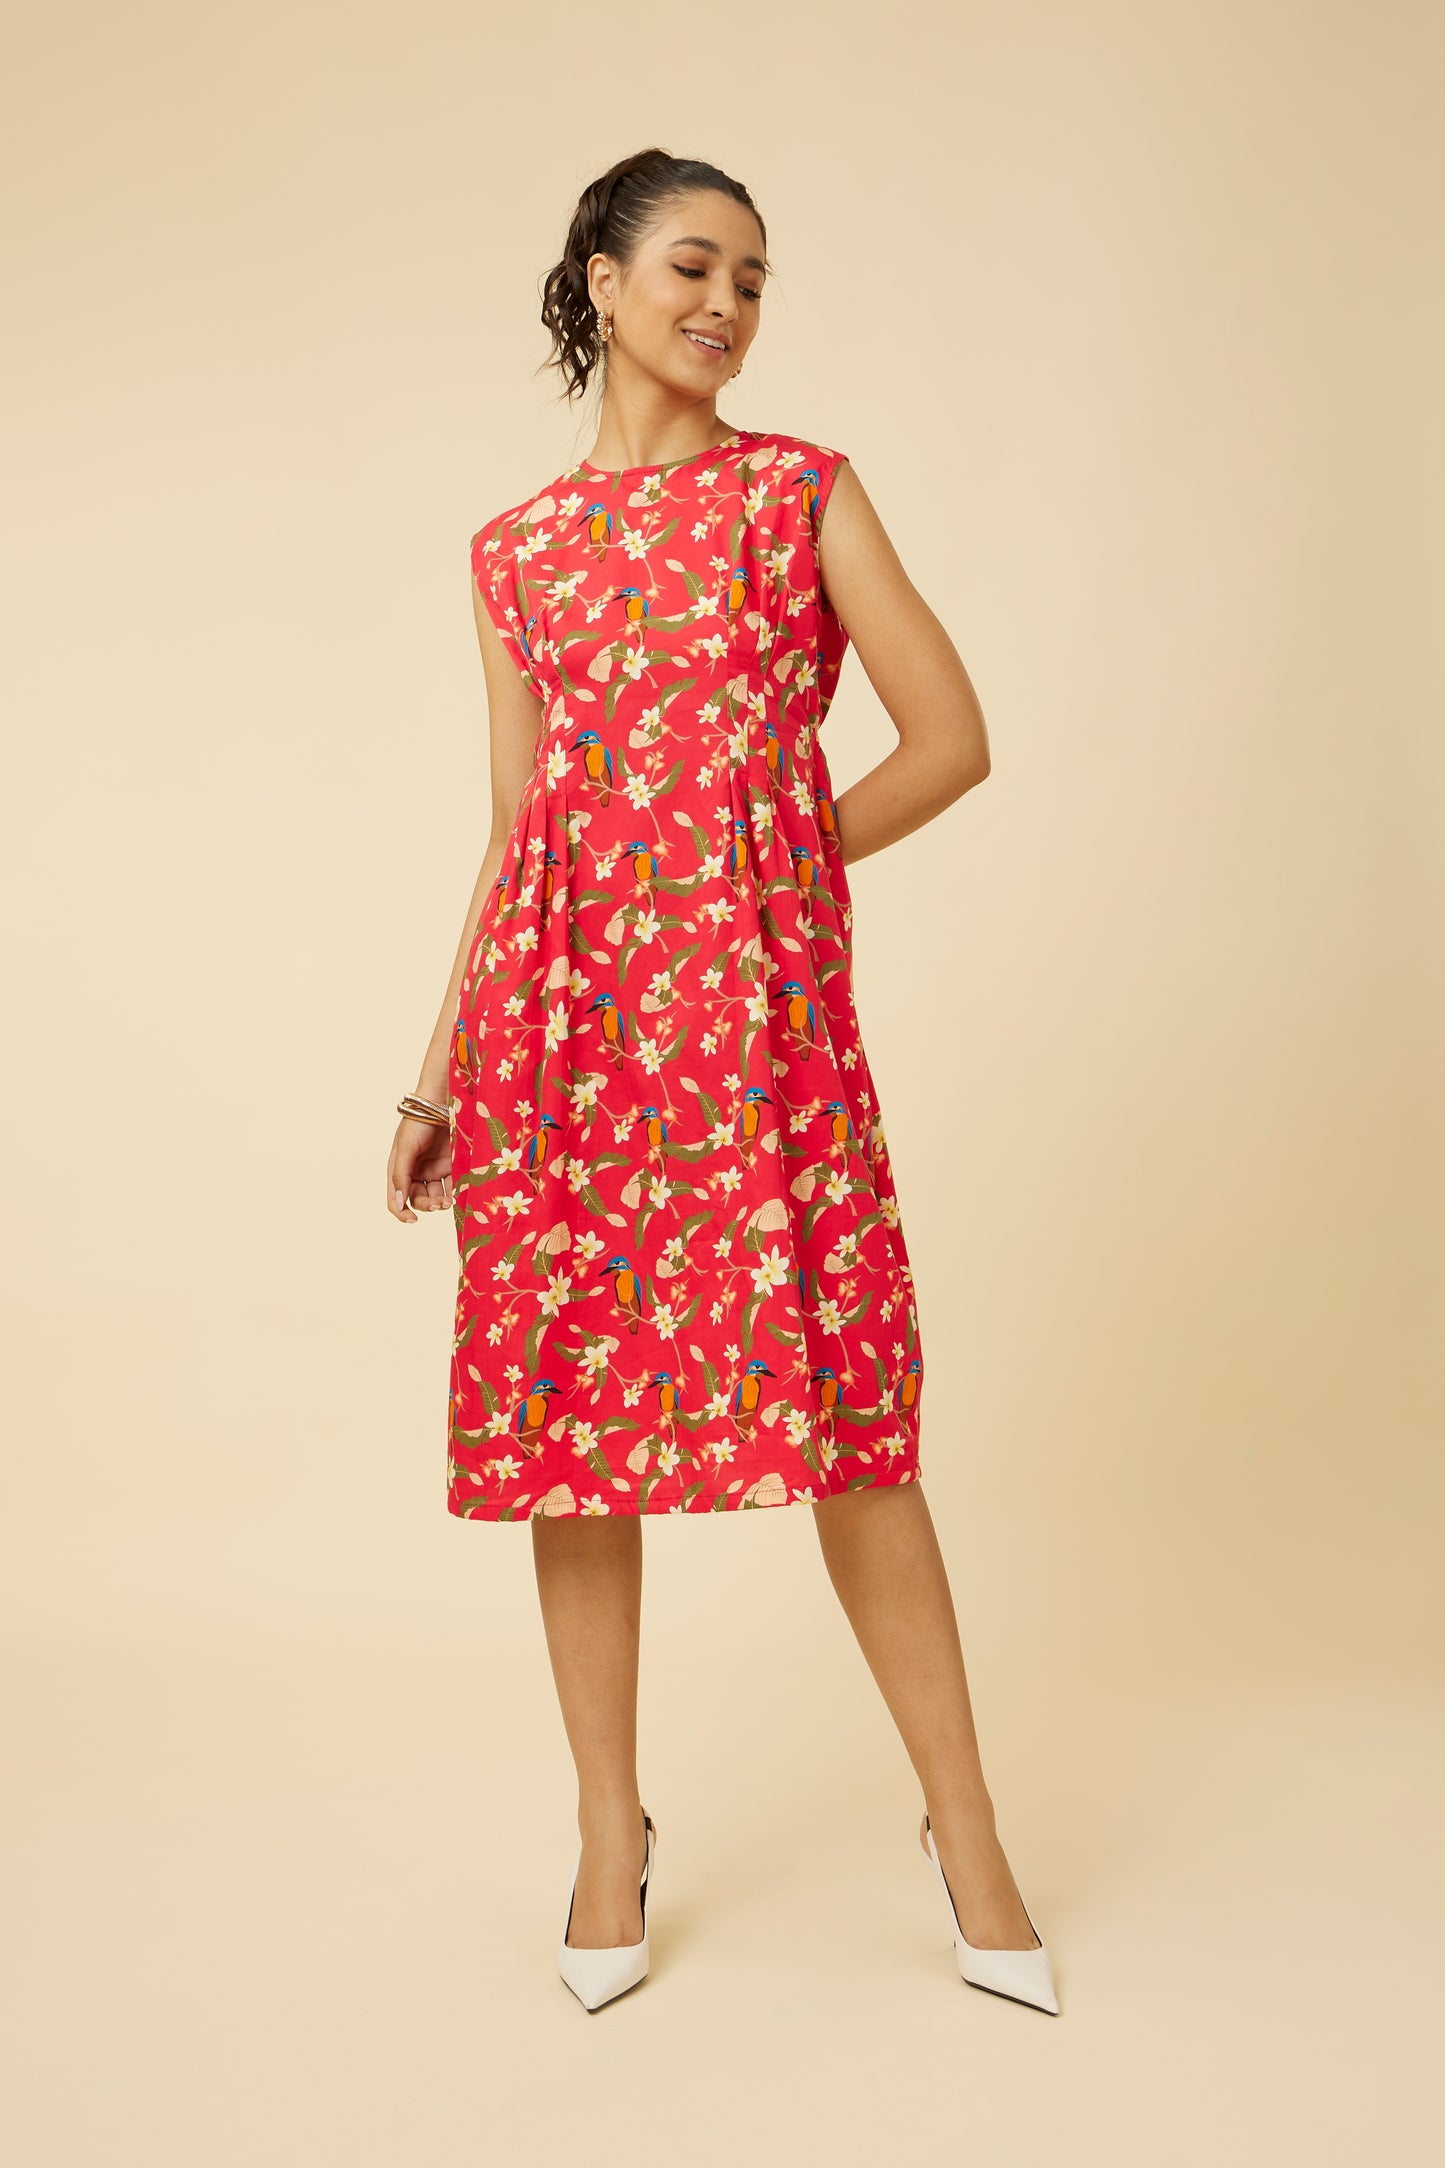 Elegant three-quarter view of a sleeveless Crimson Summery Dress with kingfisher, plumeria, leaves, and roseapple prints, showcasing the A-line silhouette and front tucks.